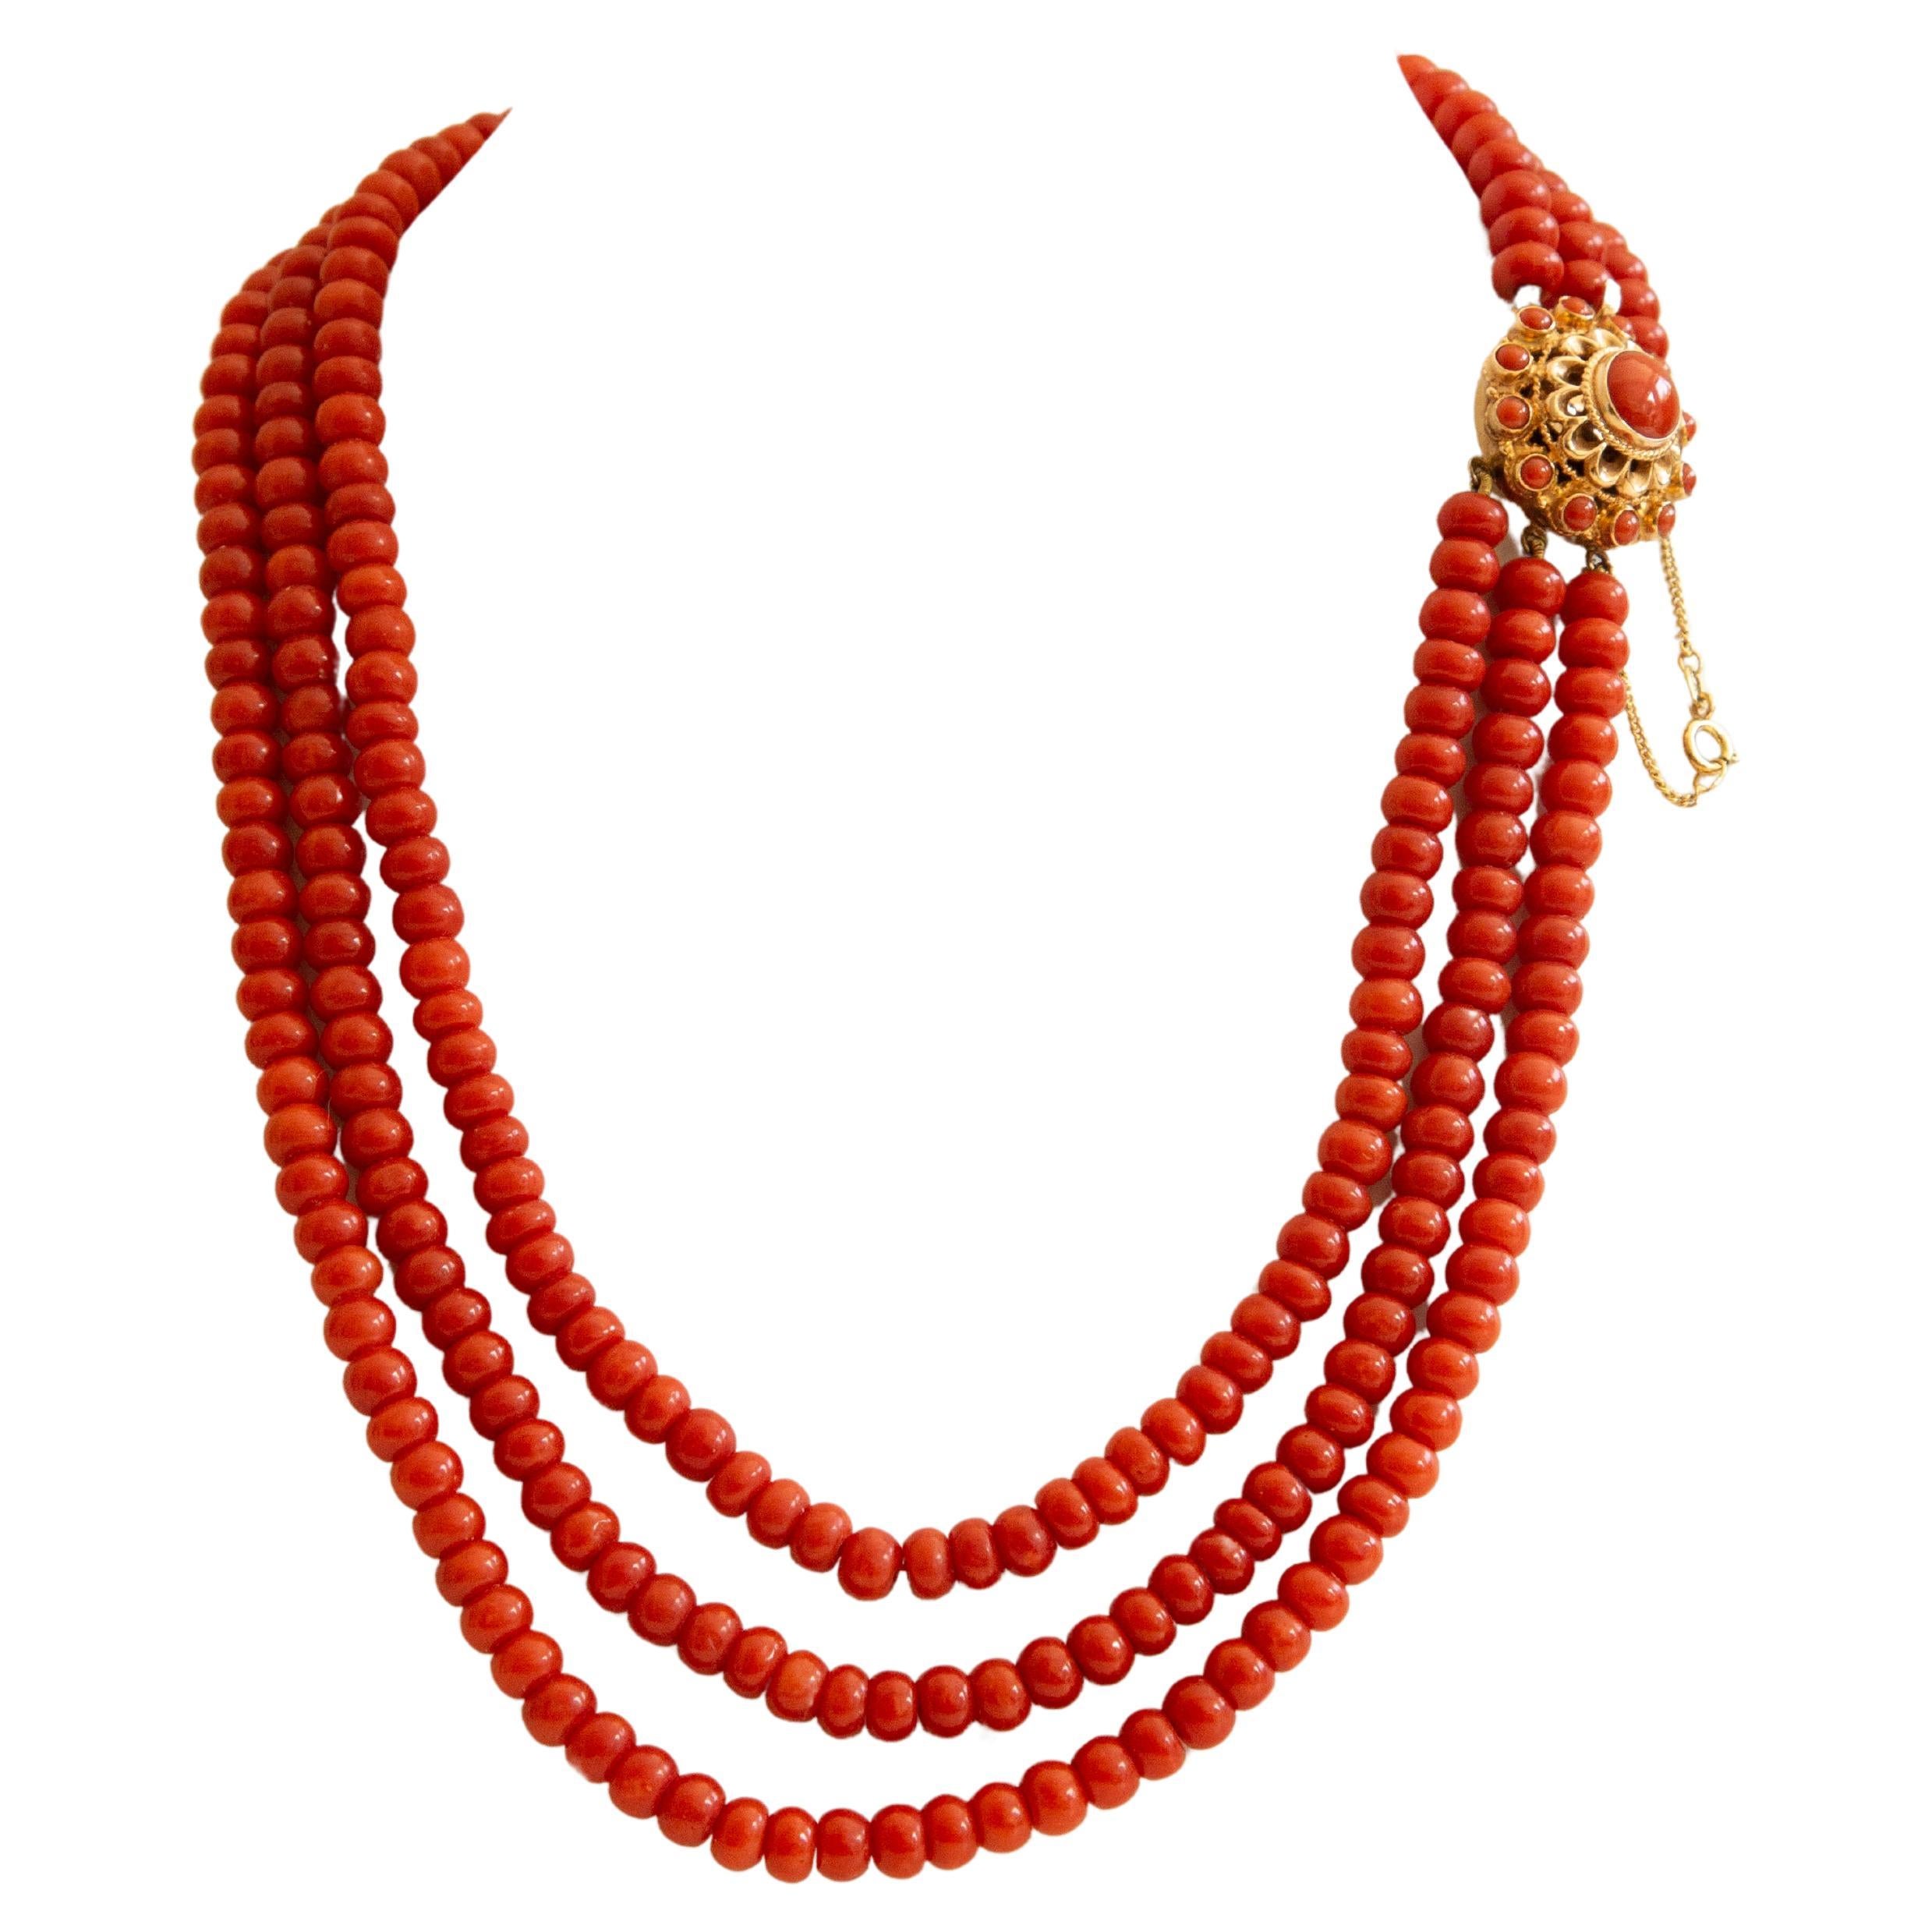 Antique Dutch 3-Row Red Coral Necklace Choker with Filigree 14 Karat Gold Clasp For Sale